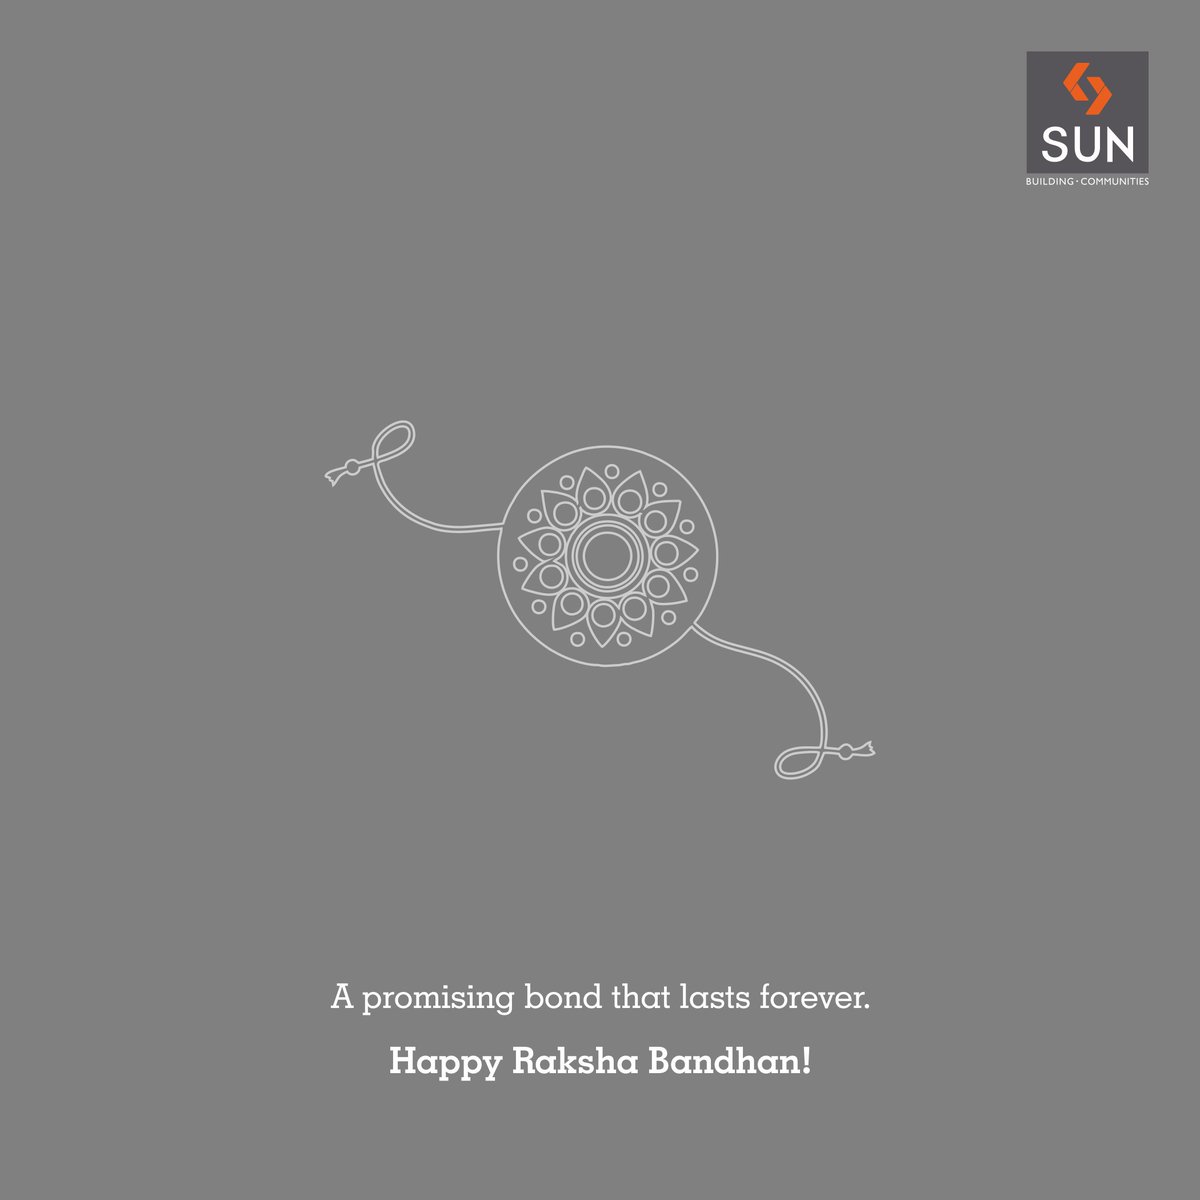 A thread of #promise that holds and protects the #siblings forever with love. 
Happy #Rakshabandhan! https://t.co/5bVk4Tm95O